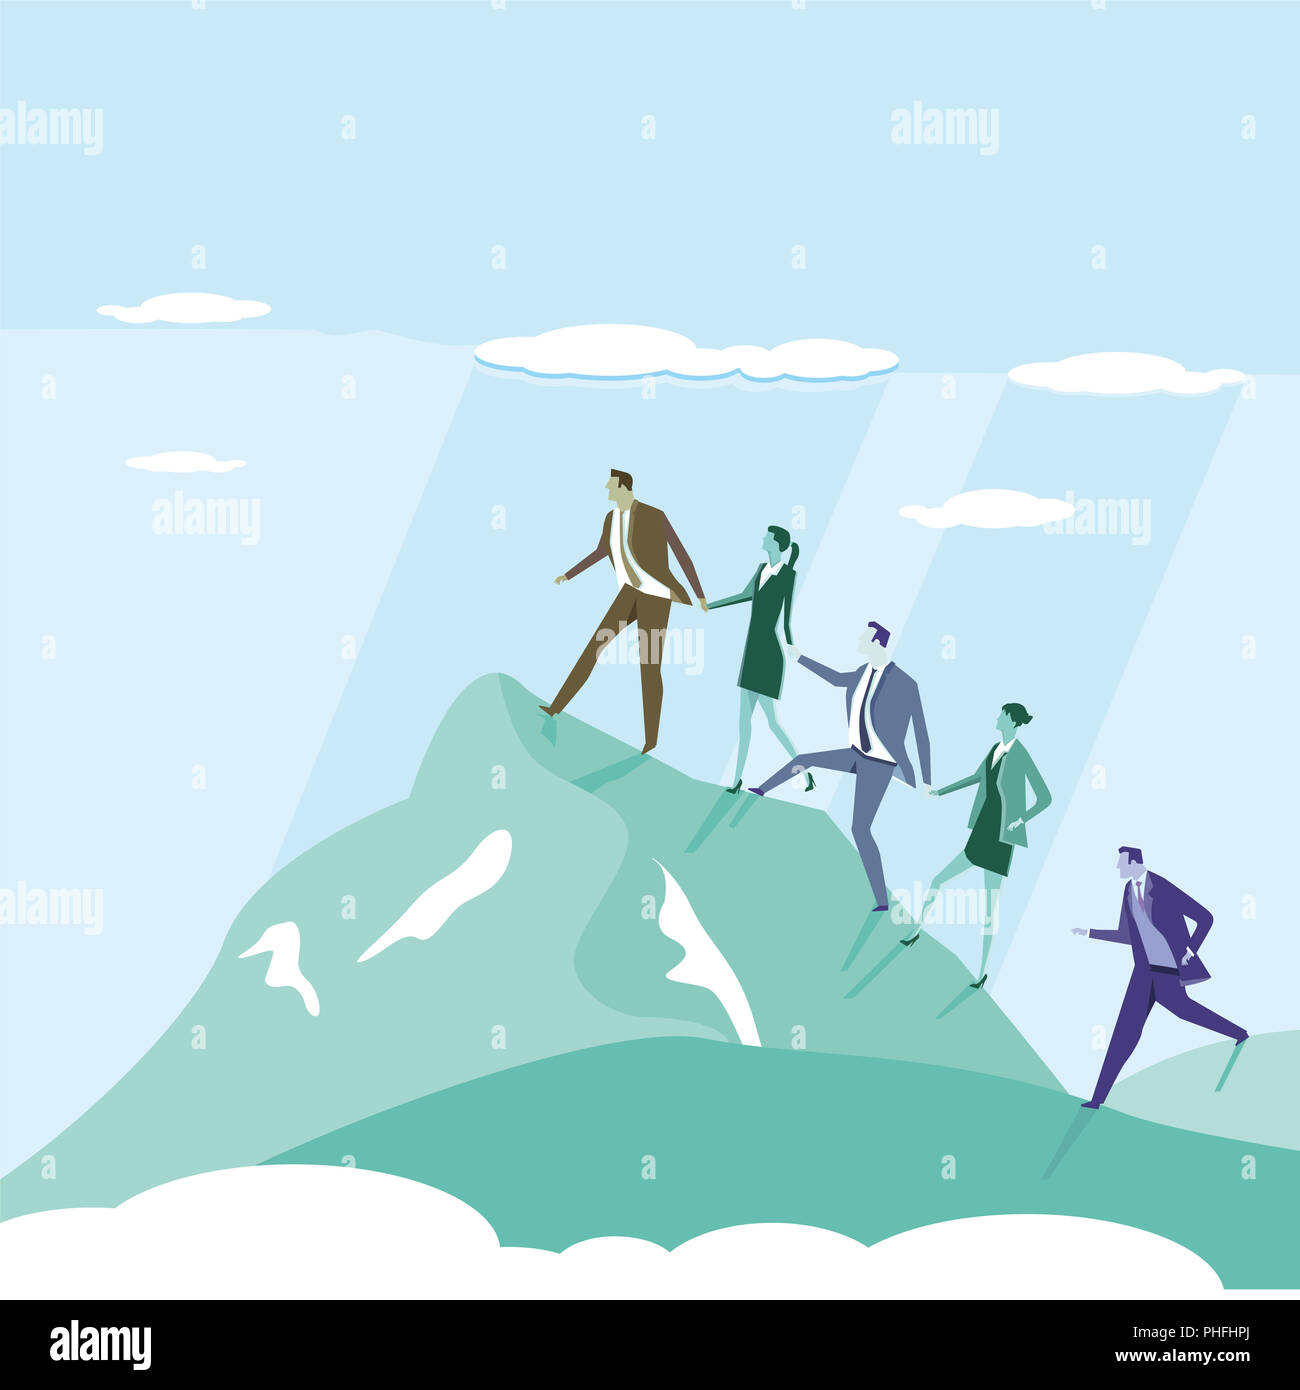 Business Successfully ascend illustration Stock Photo